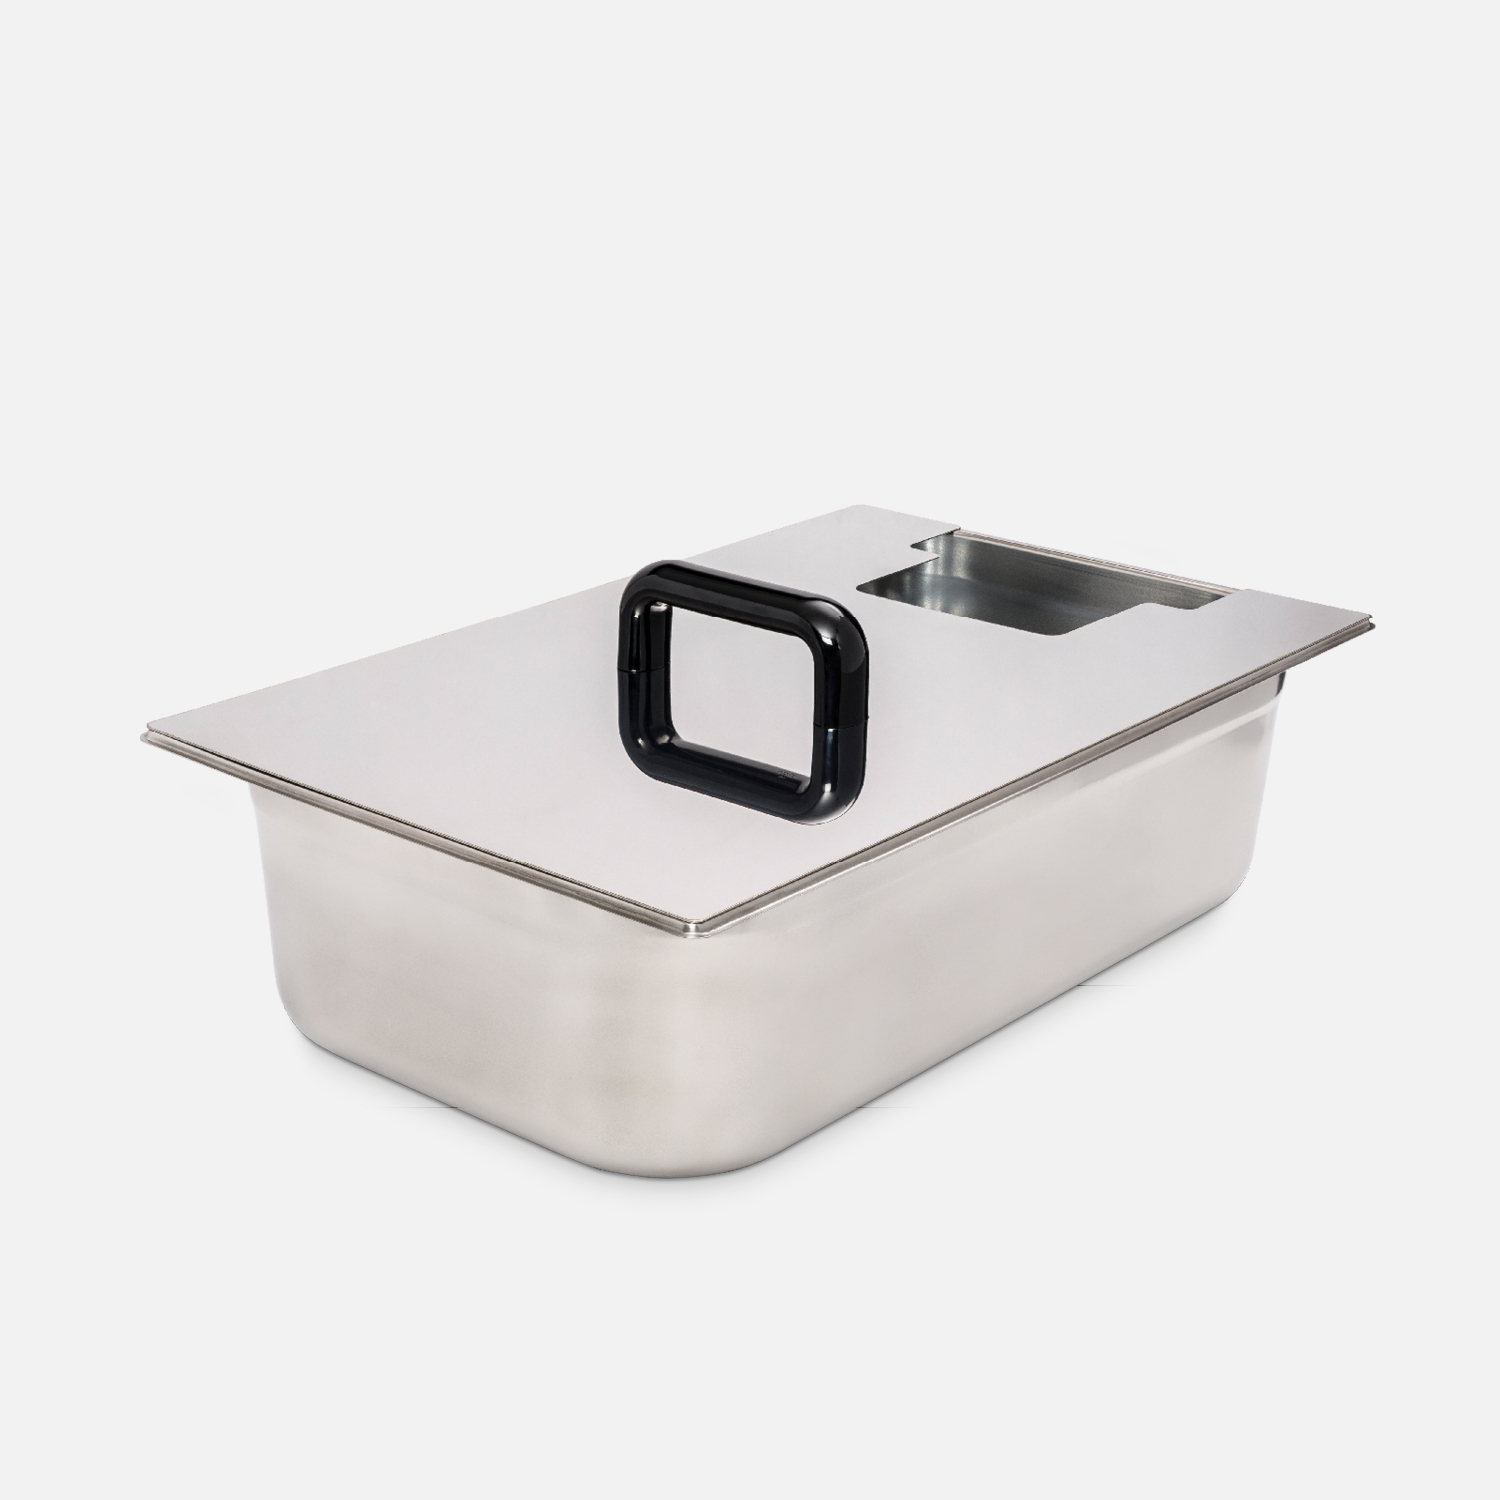 Sous-vide basin made of stainless steel with a lid, including a cutout for the LV.50 thermostat